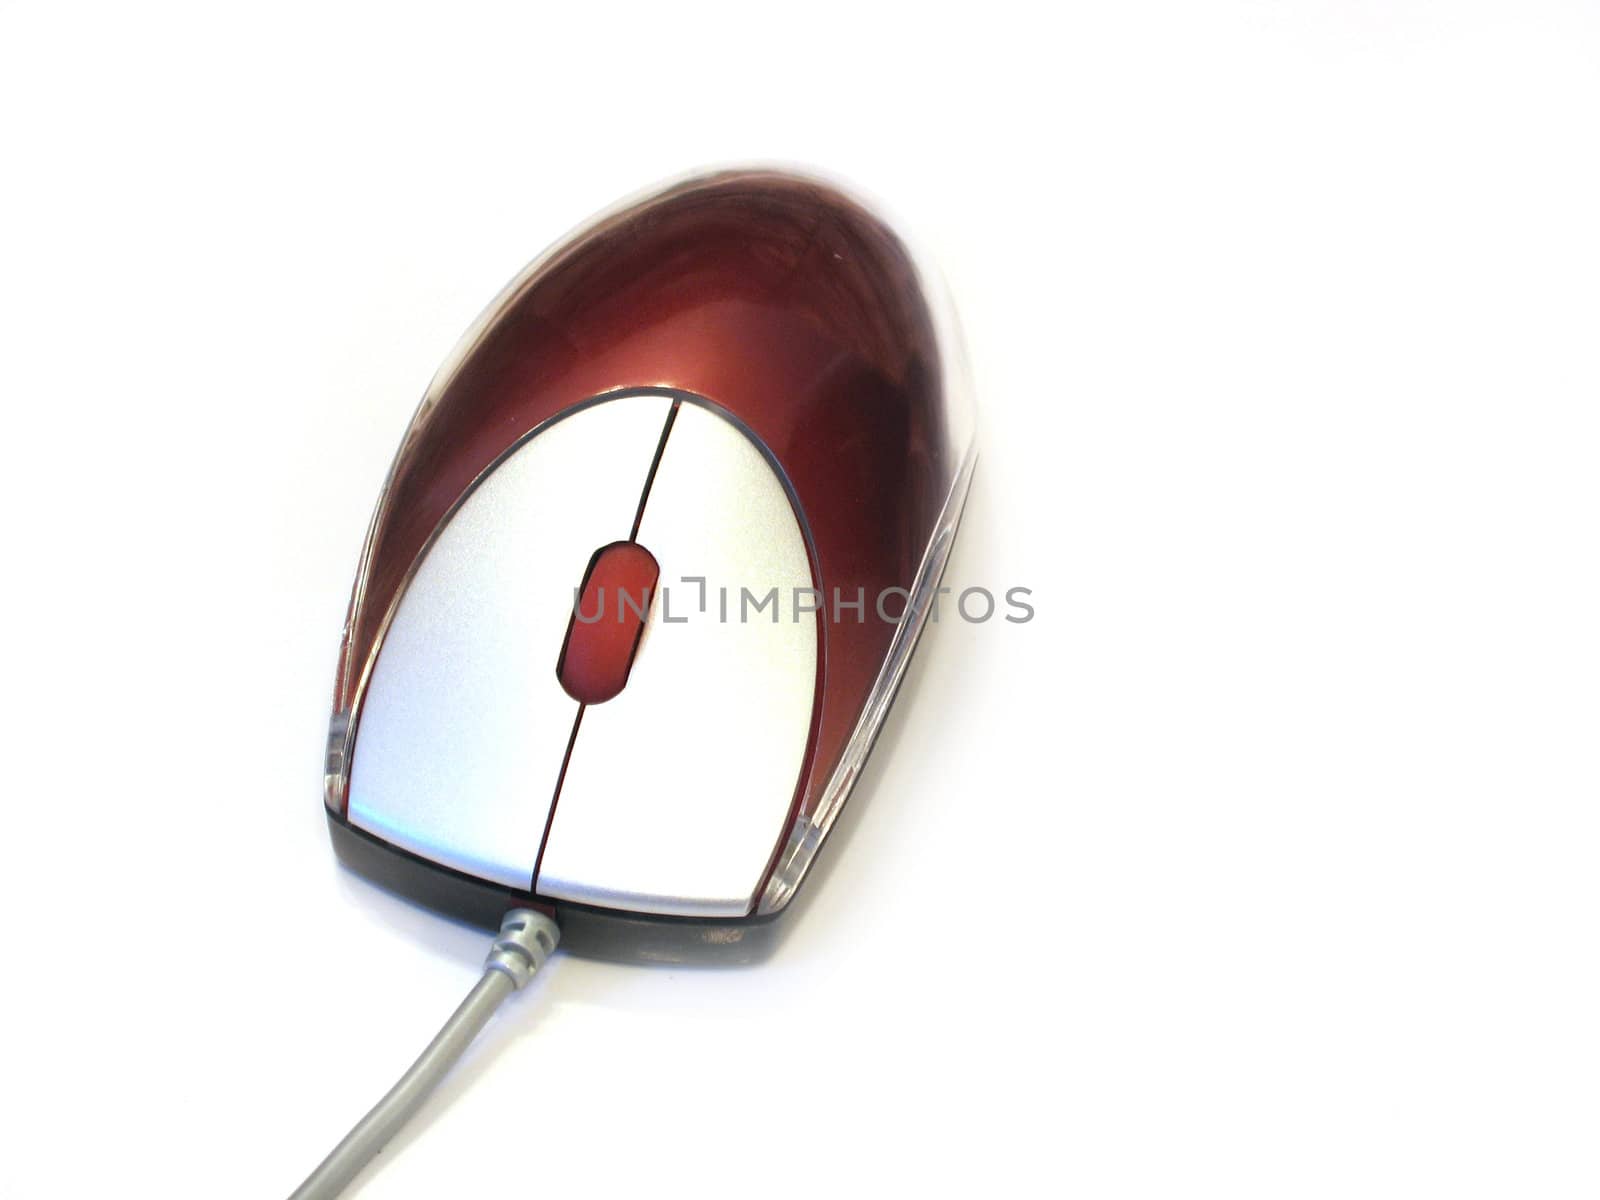 Shiney New Red Mouse